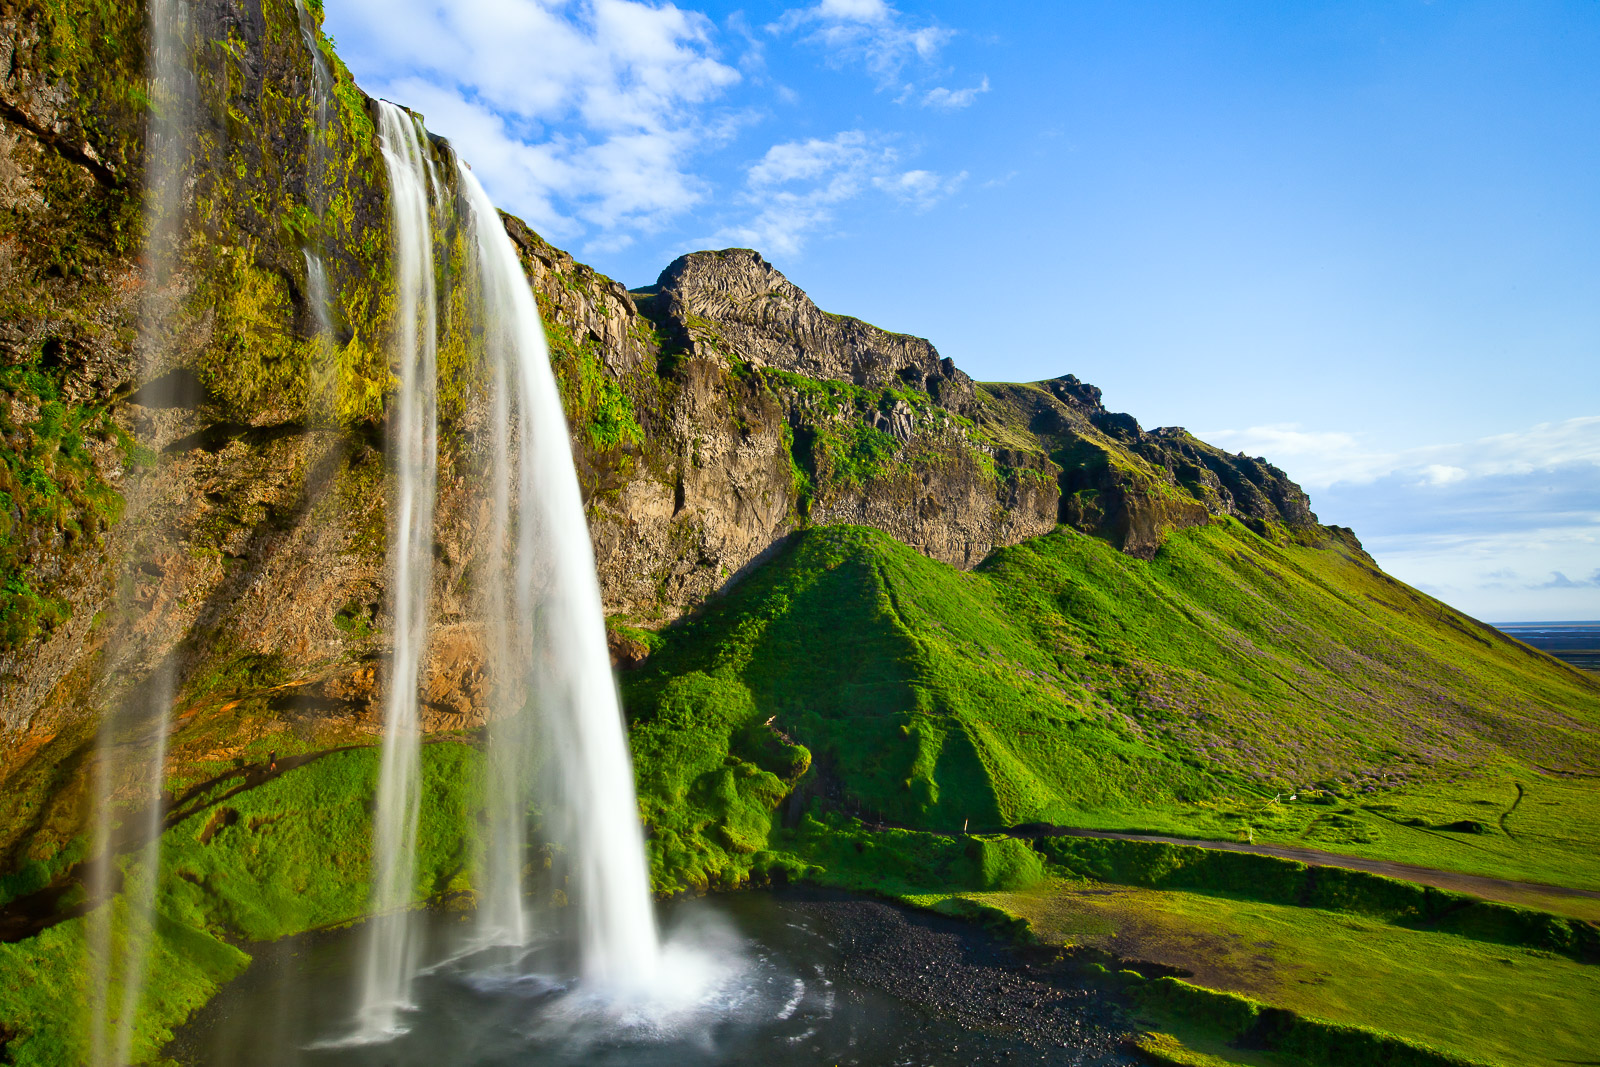 Seljalandsfoss falls is so dramatic you can just stand there and watch it for hours. This is a land of landscape jewels with...